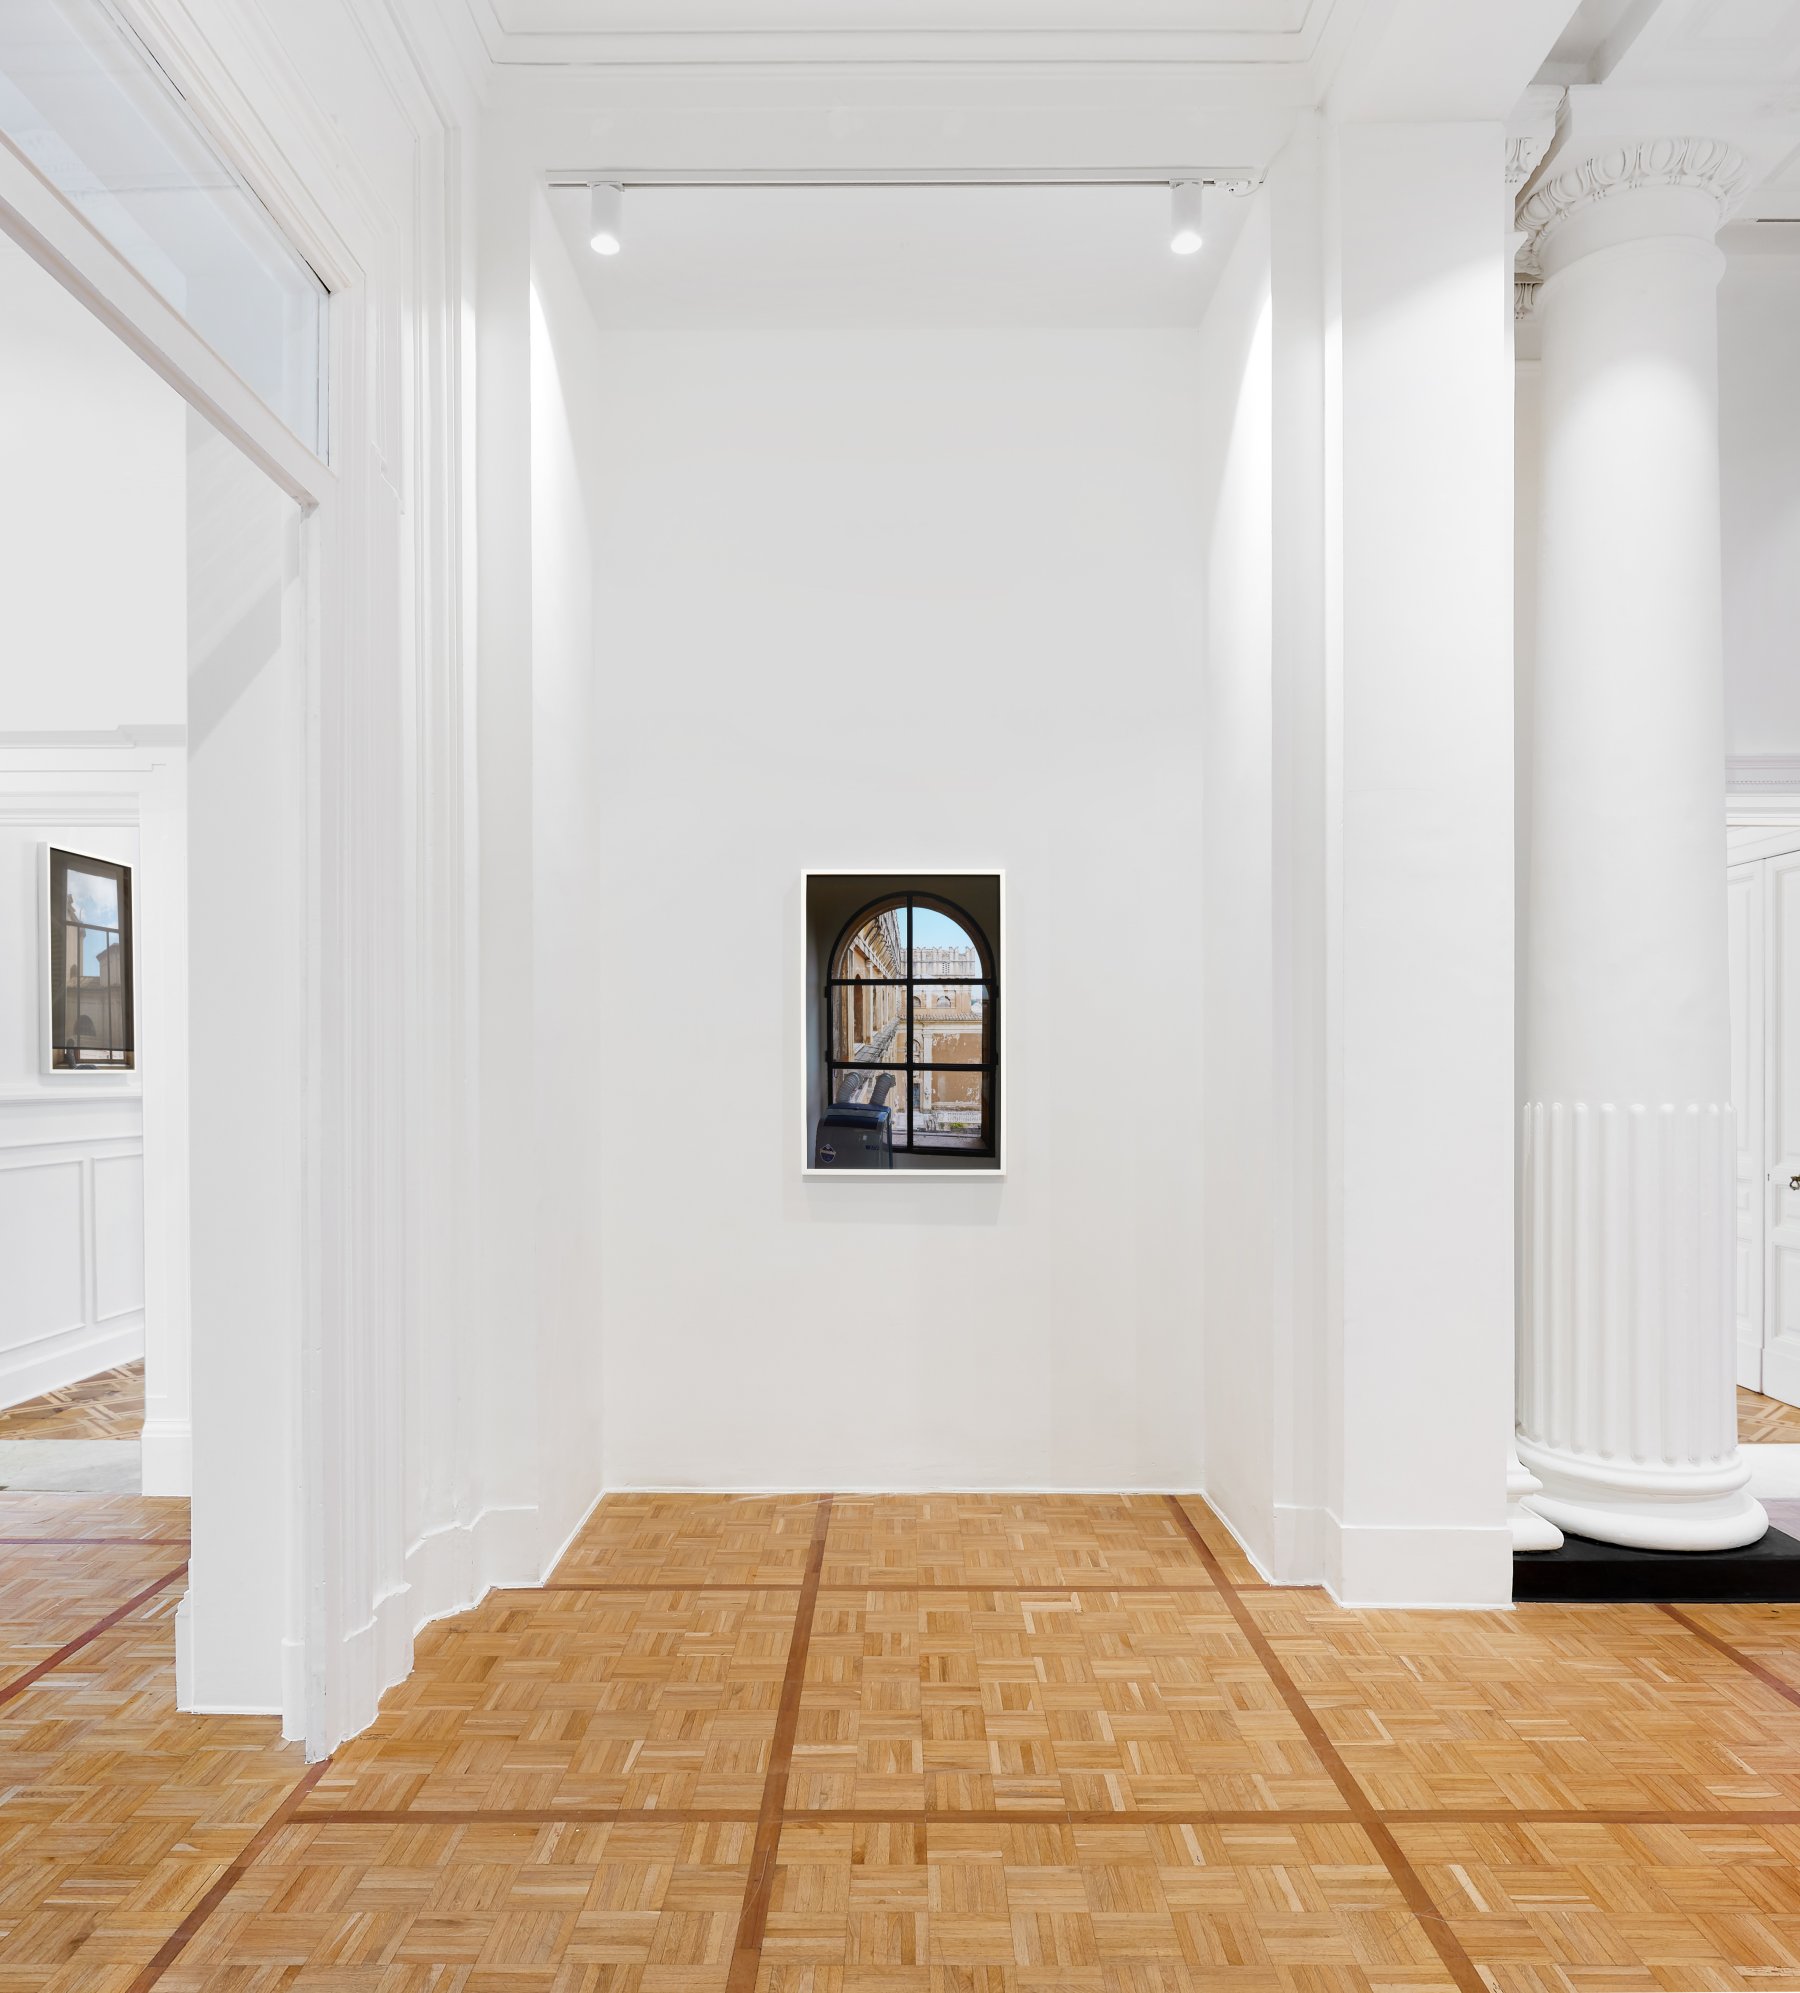 Installation image for Catherine Opie: Walls, Windows and Blood, at Thomas Dane Gallery